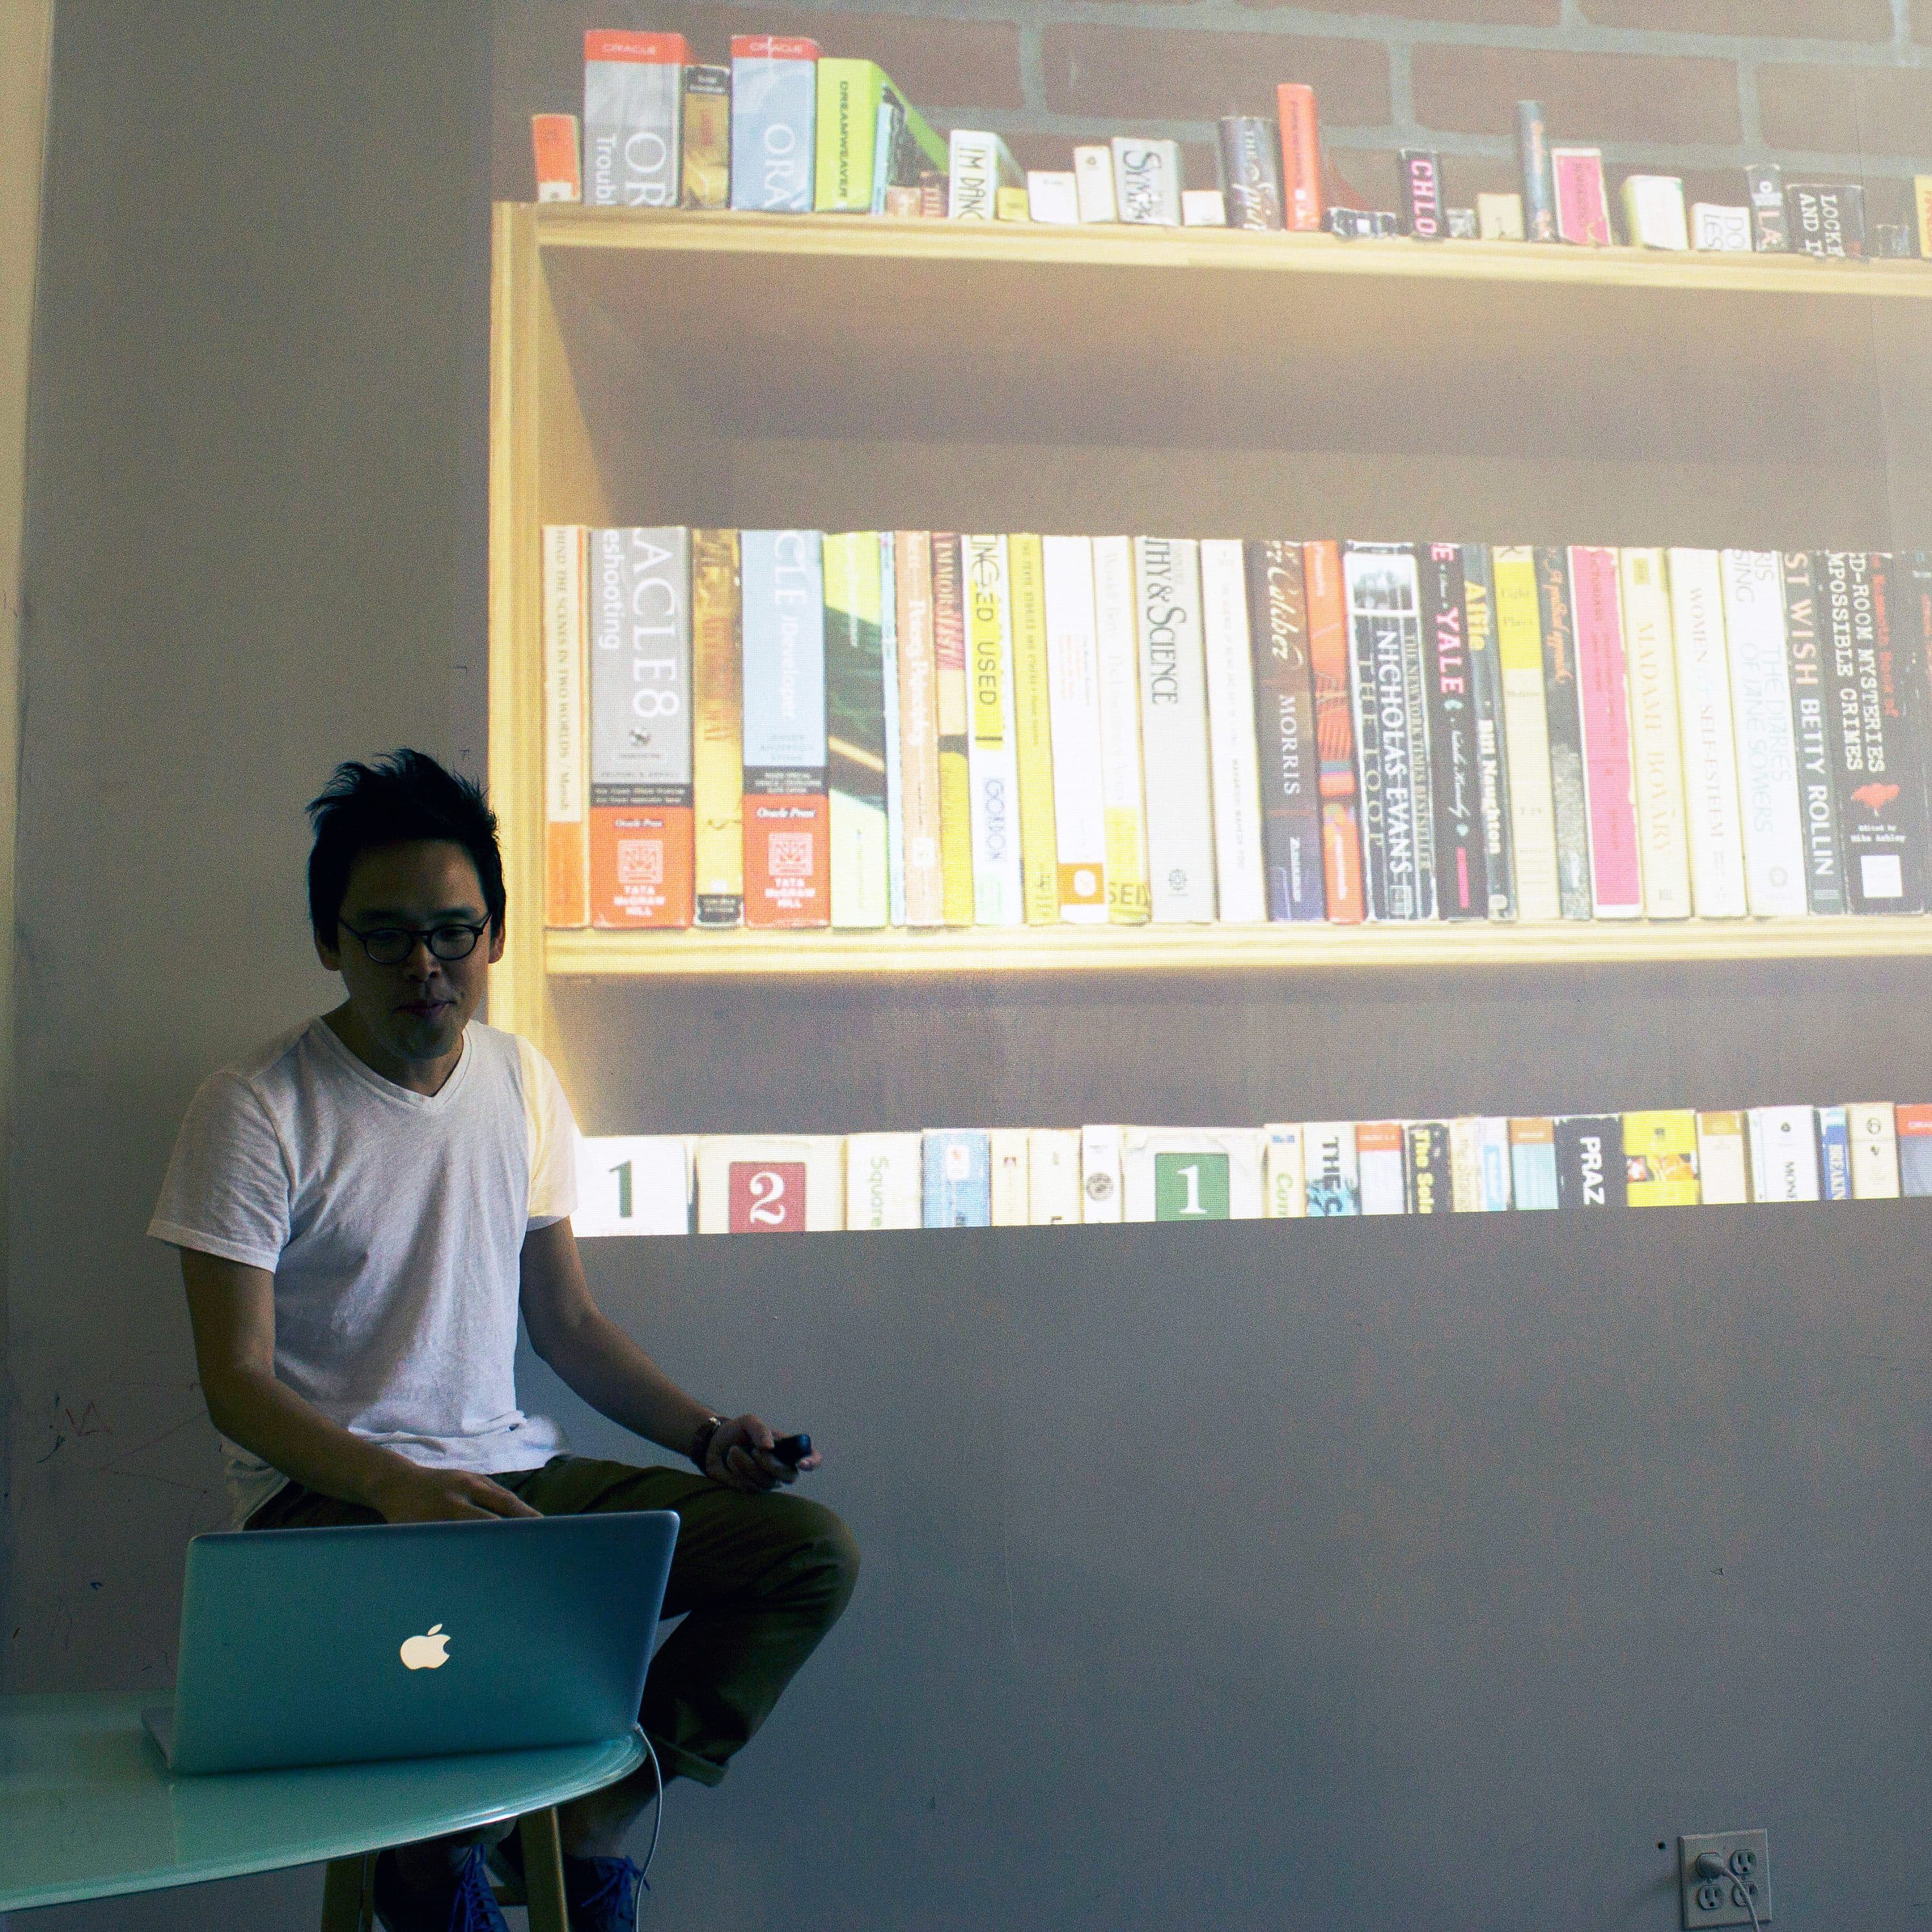 A person wearing glasses and a white T-shirt sits in front of a projected image of a bookshelf full of books. They are holding a device and have a laptop on their lap. The projection is displayed on a large whiteboard behind them.